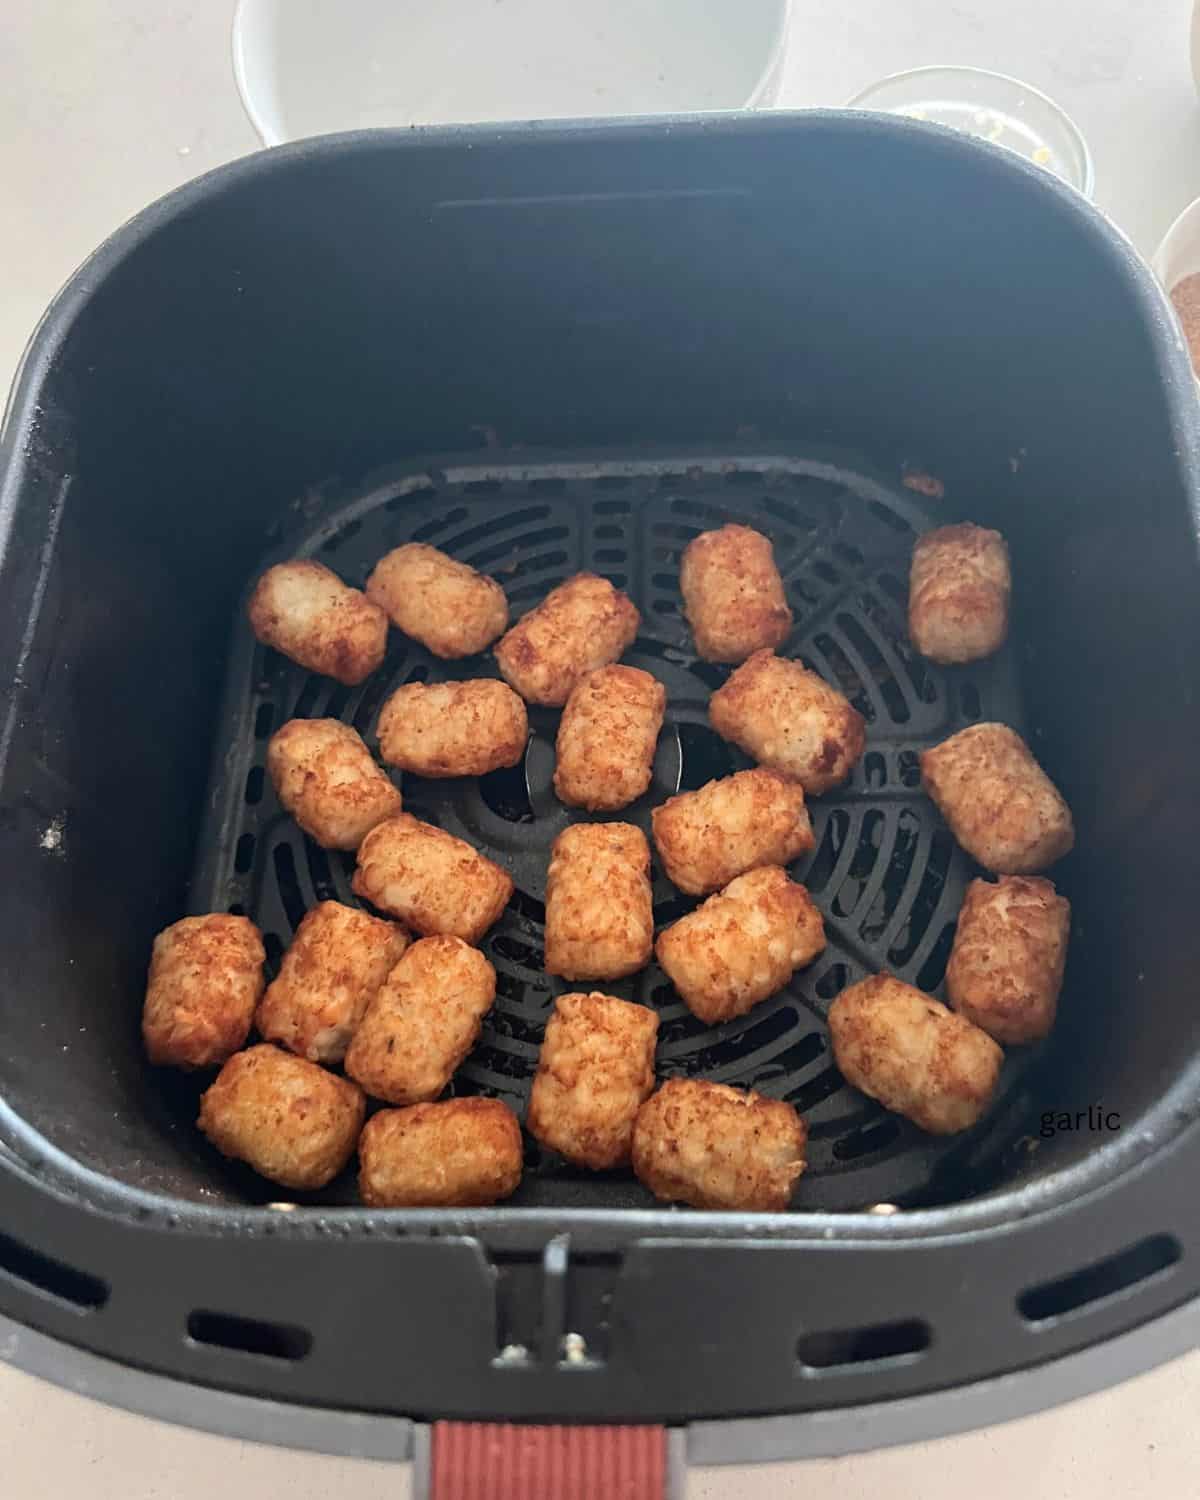 Tater tots in air fryer basket. 